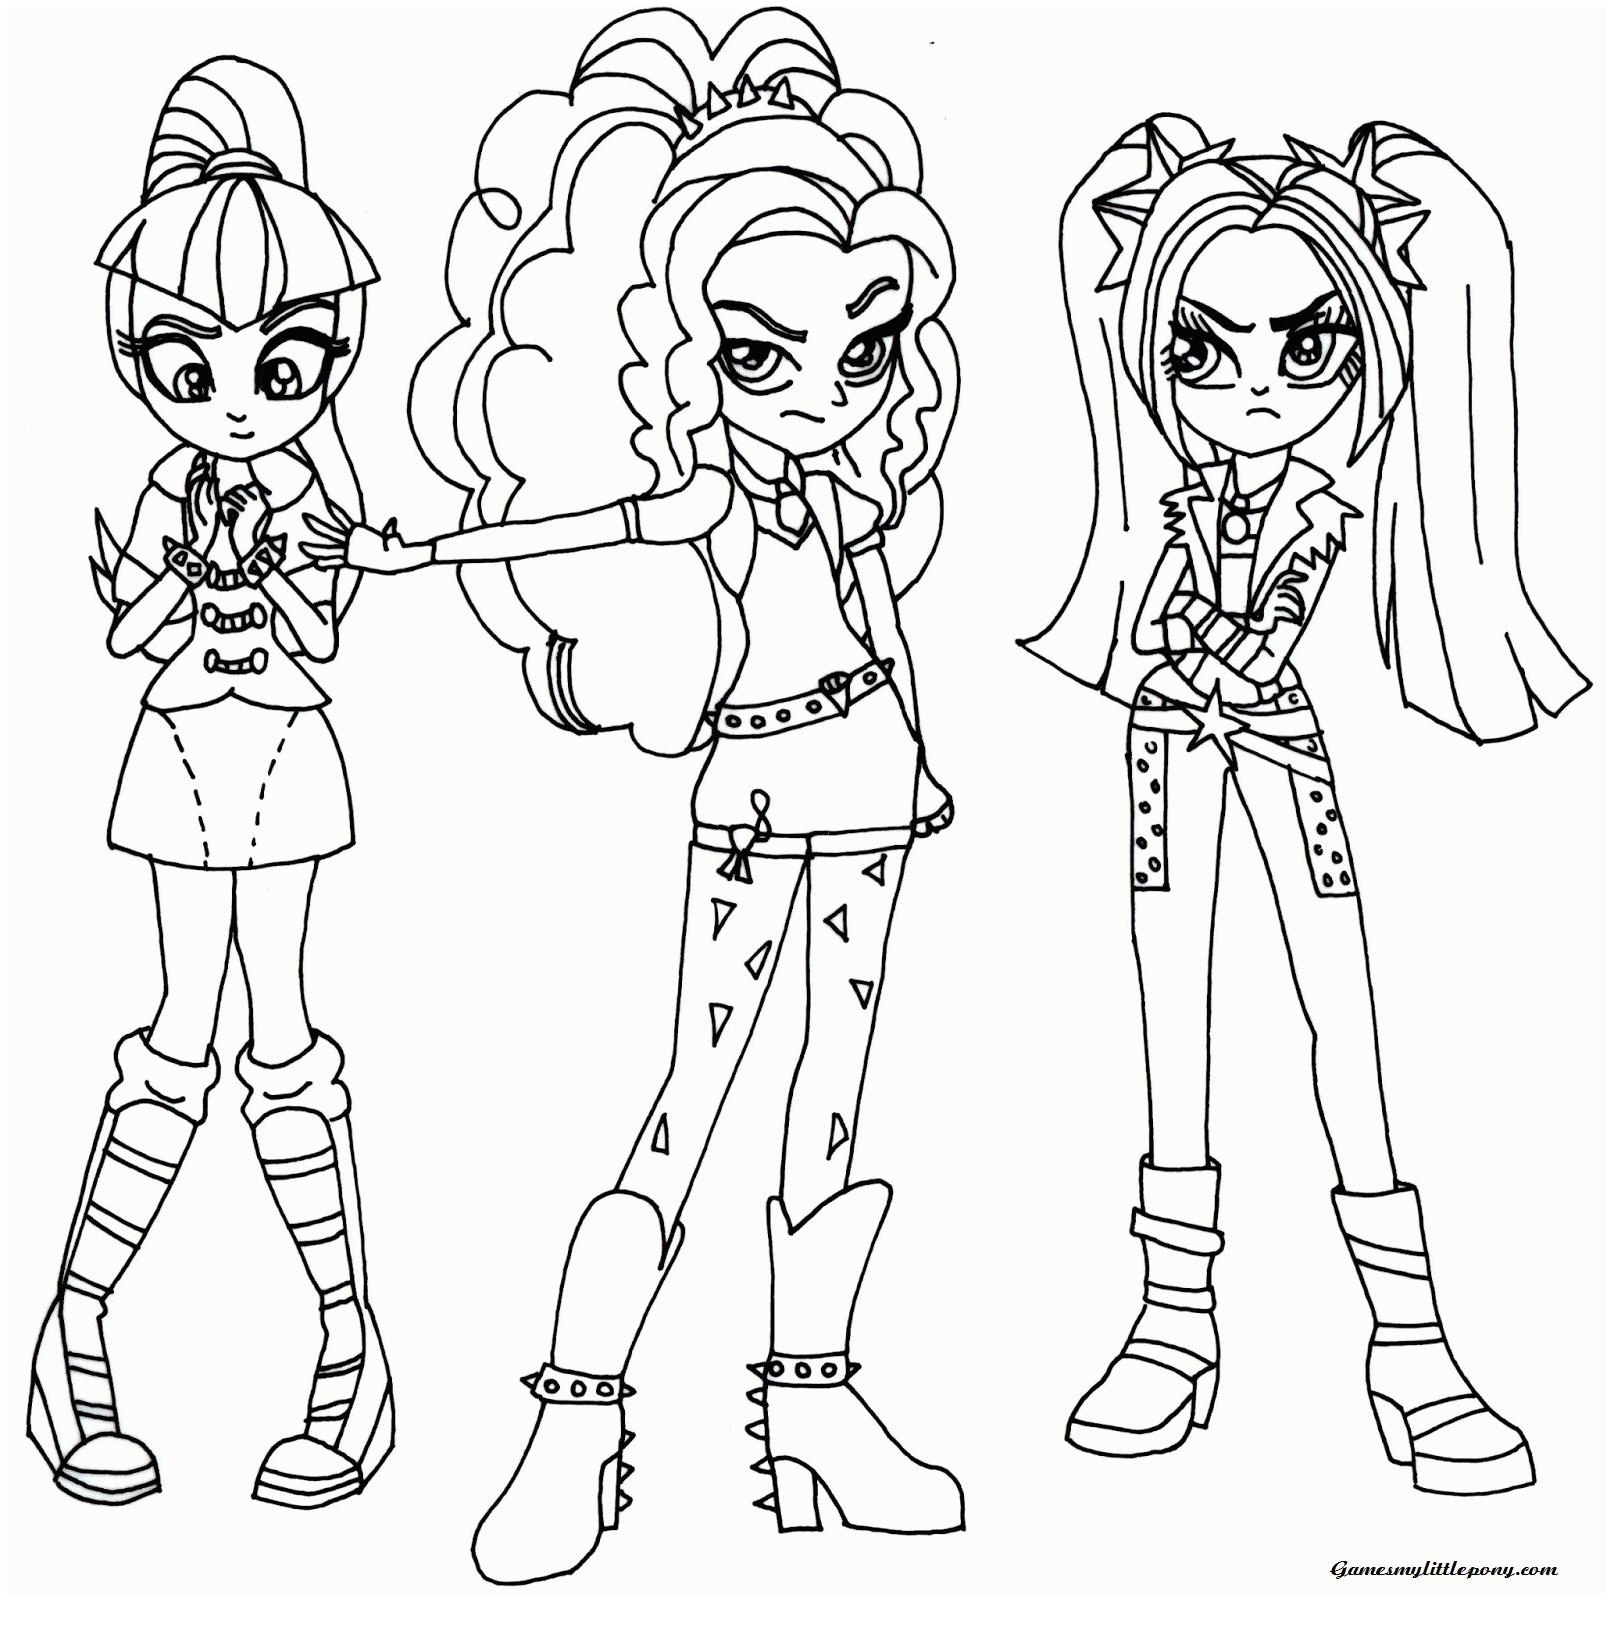 Equestria Girls Beautiful MLP Coloring Page - My Little Pony Coloring Pages